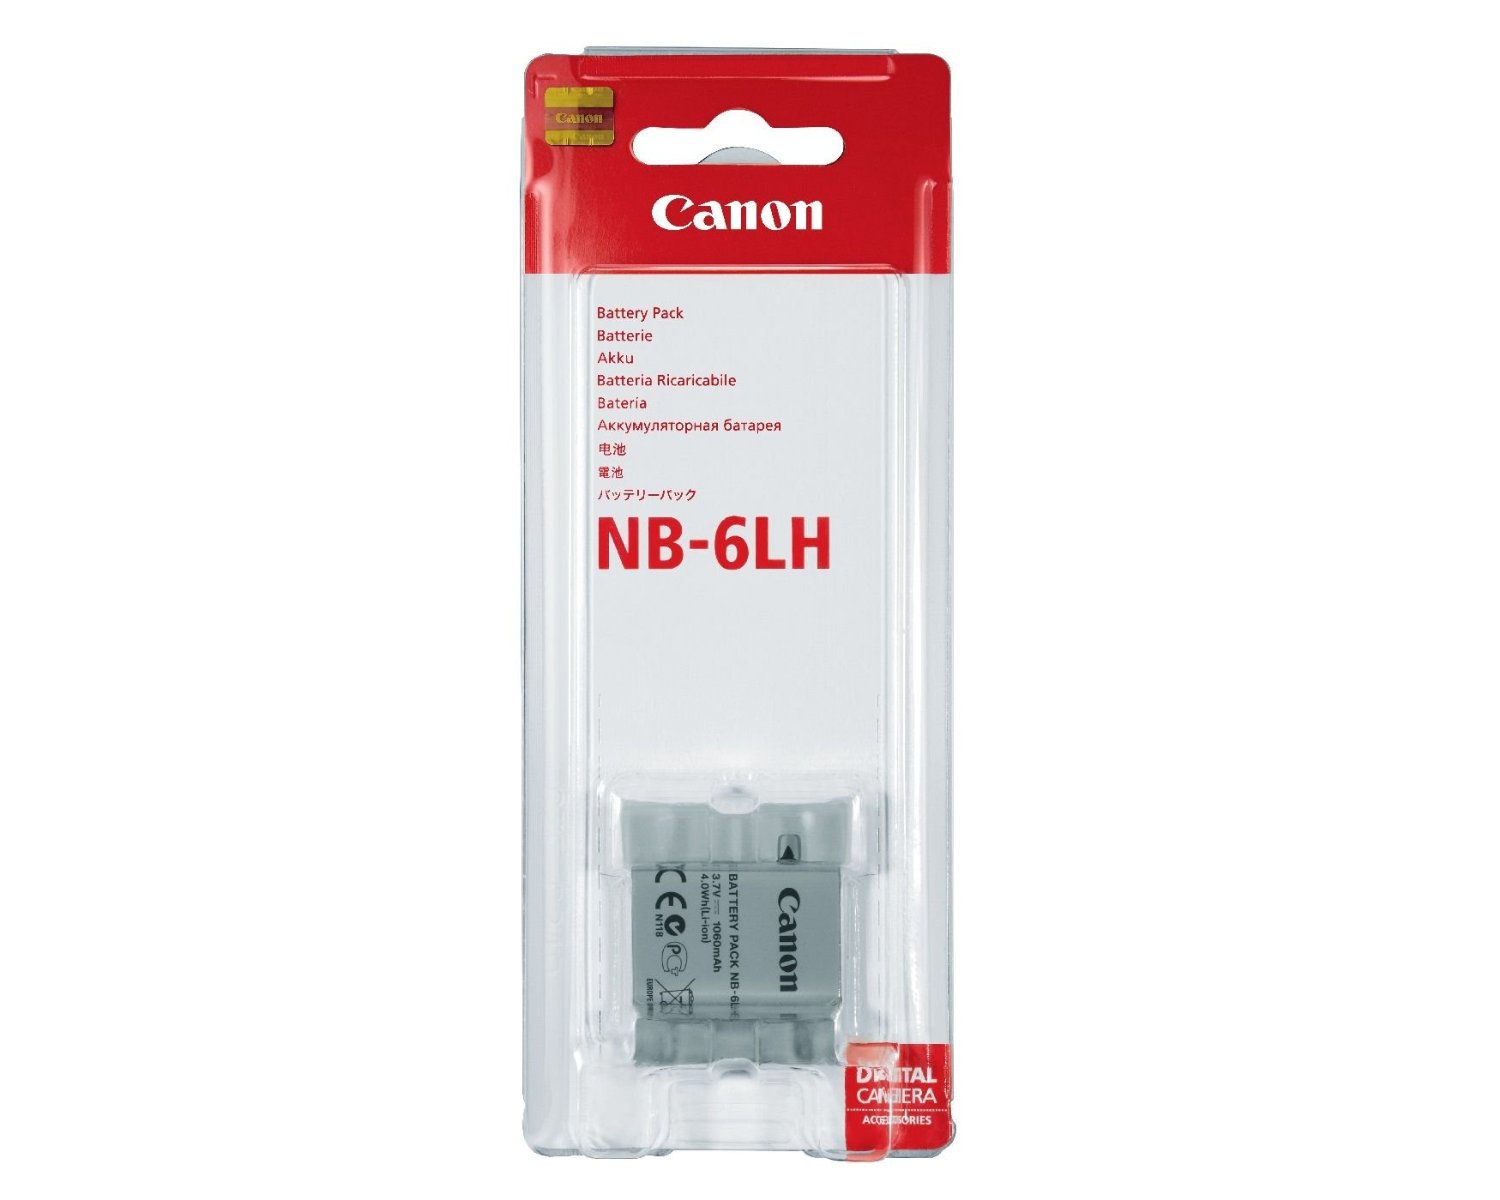 Canon Battery Pack NB-6LH